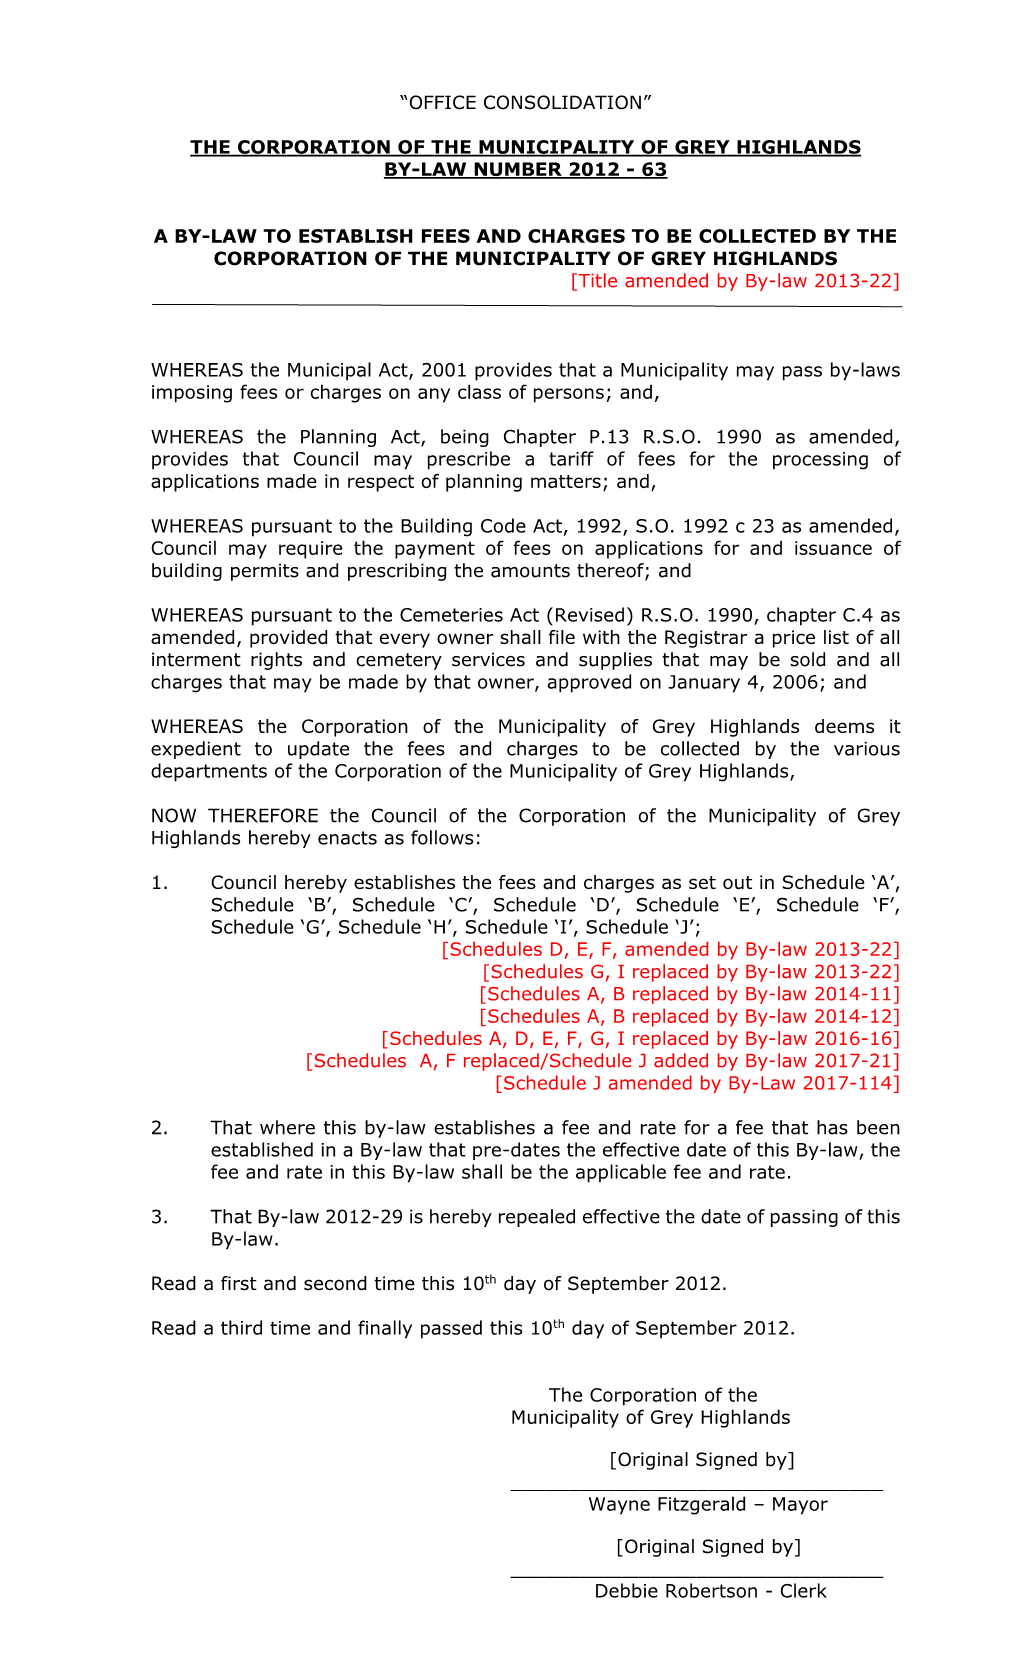 The Corporation of the Municipality of Grey Highlands By-Law Number 2012 - 63